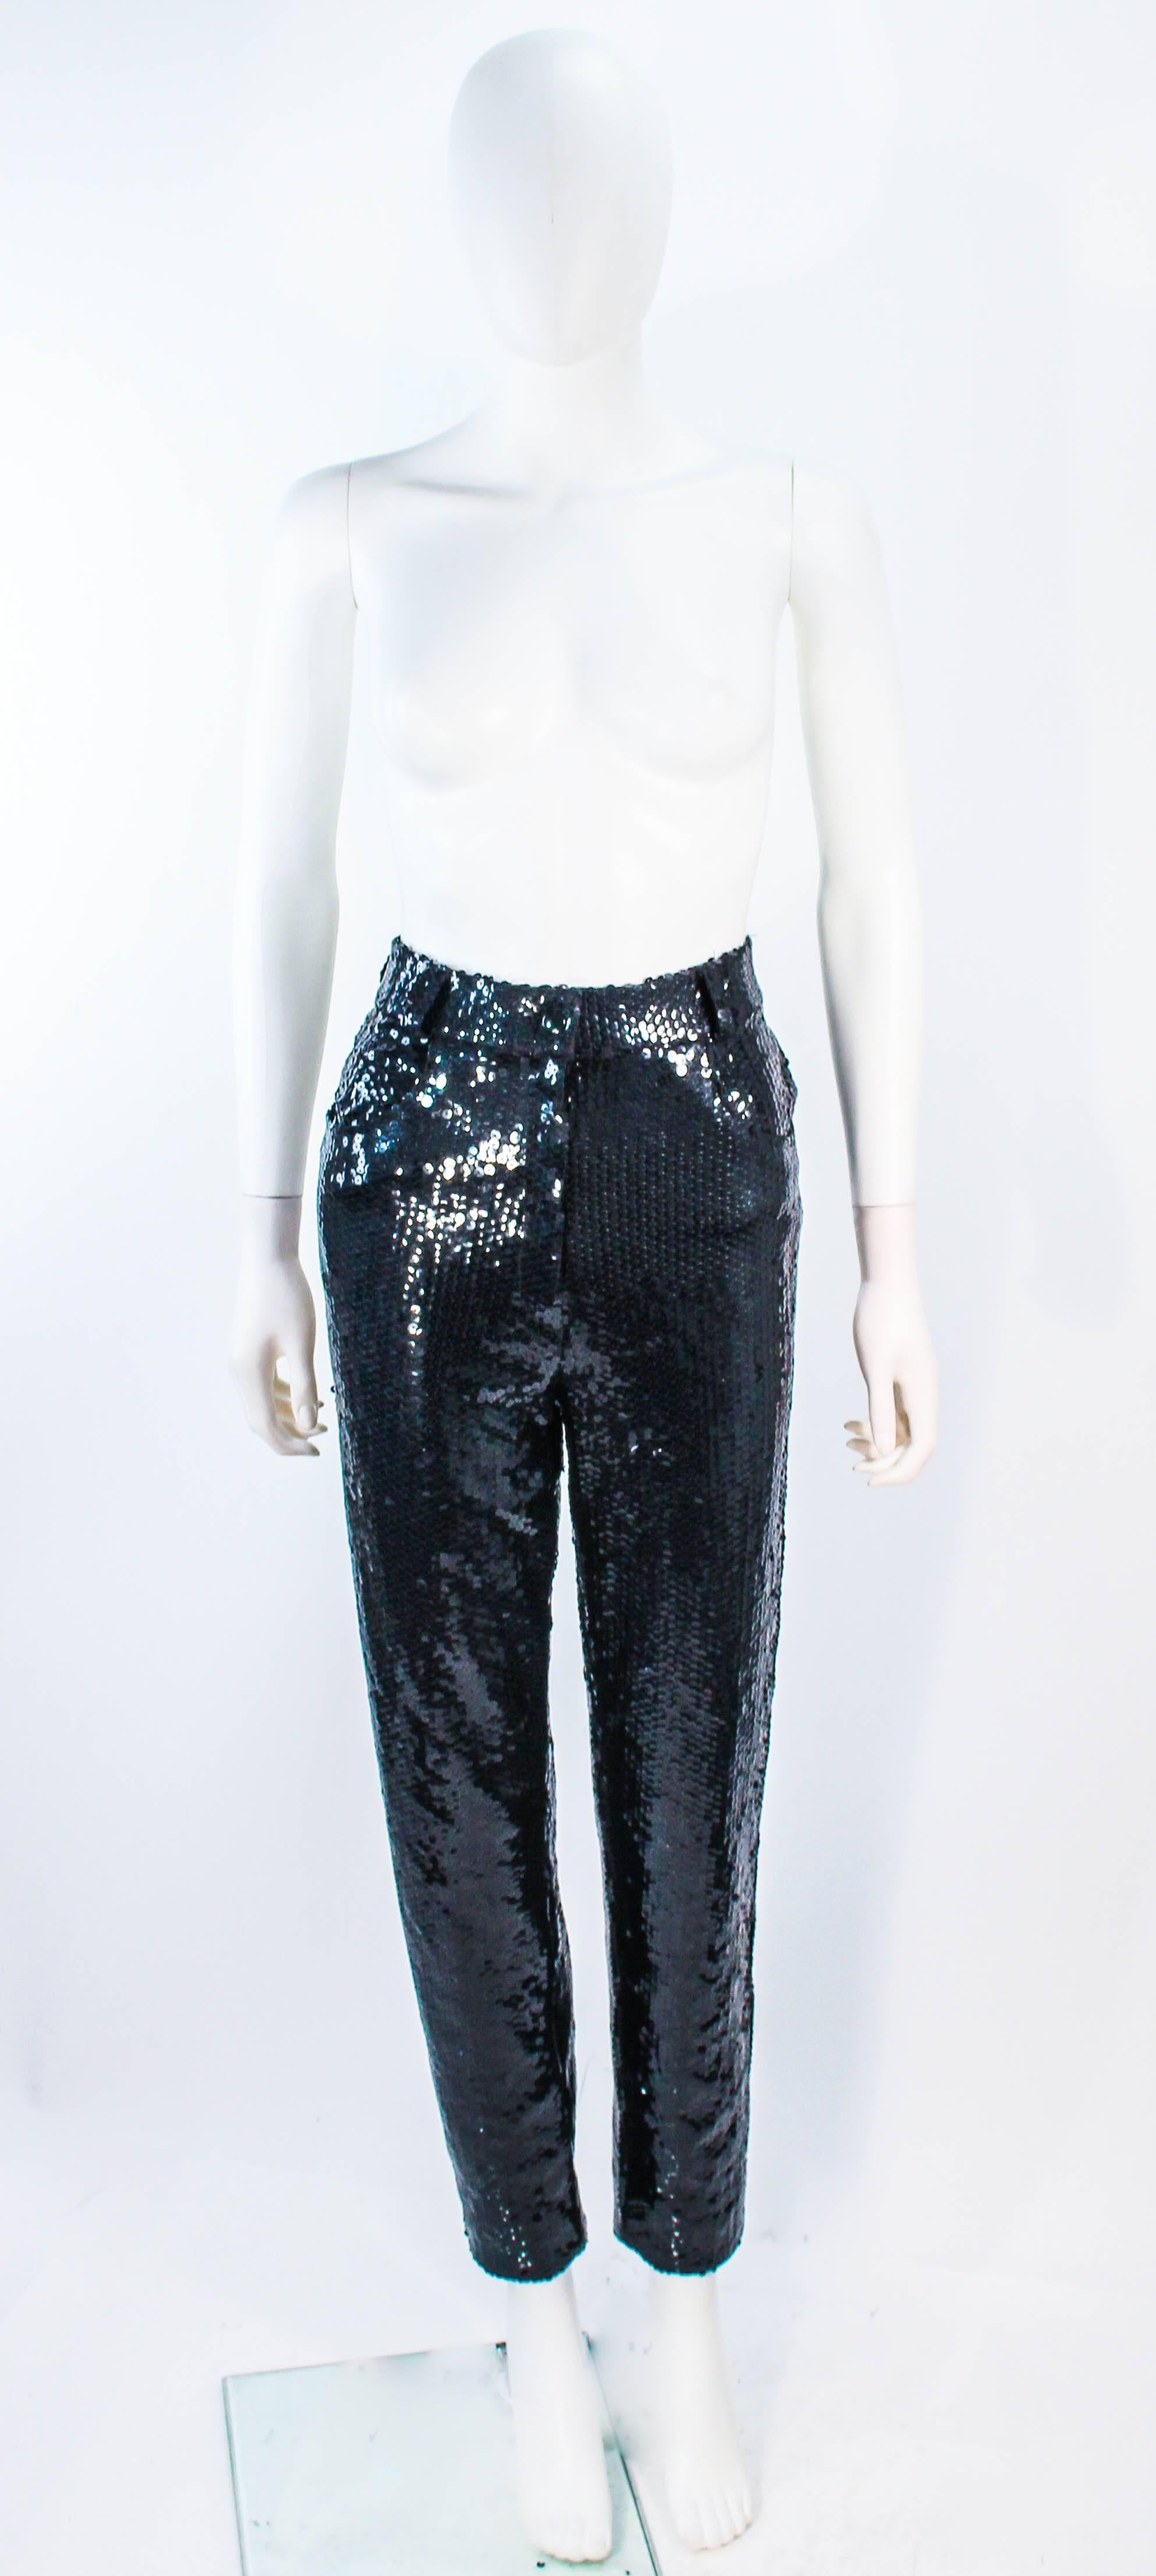  These Suite 101 pants are composed of black sequins on a stretch material. Features a high waist style. In excellent vintage condition. 

**Please cross-reference measurements for personal accuracy. Size in description box is an estimation.